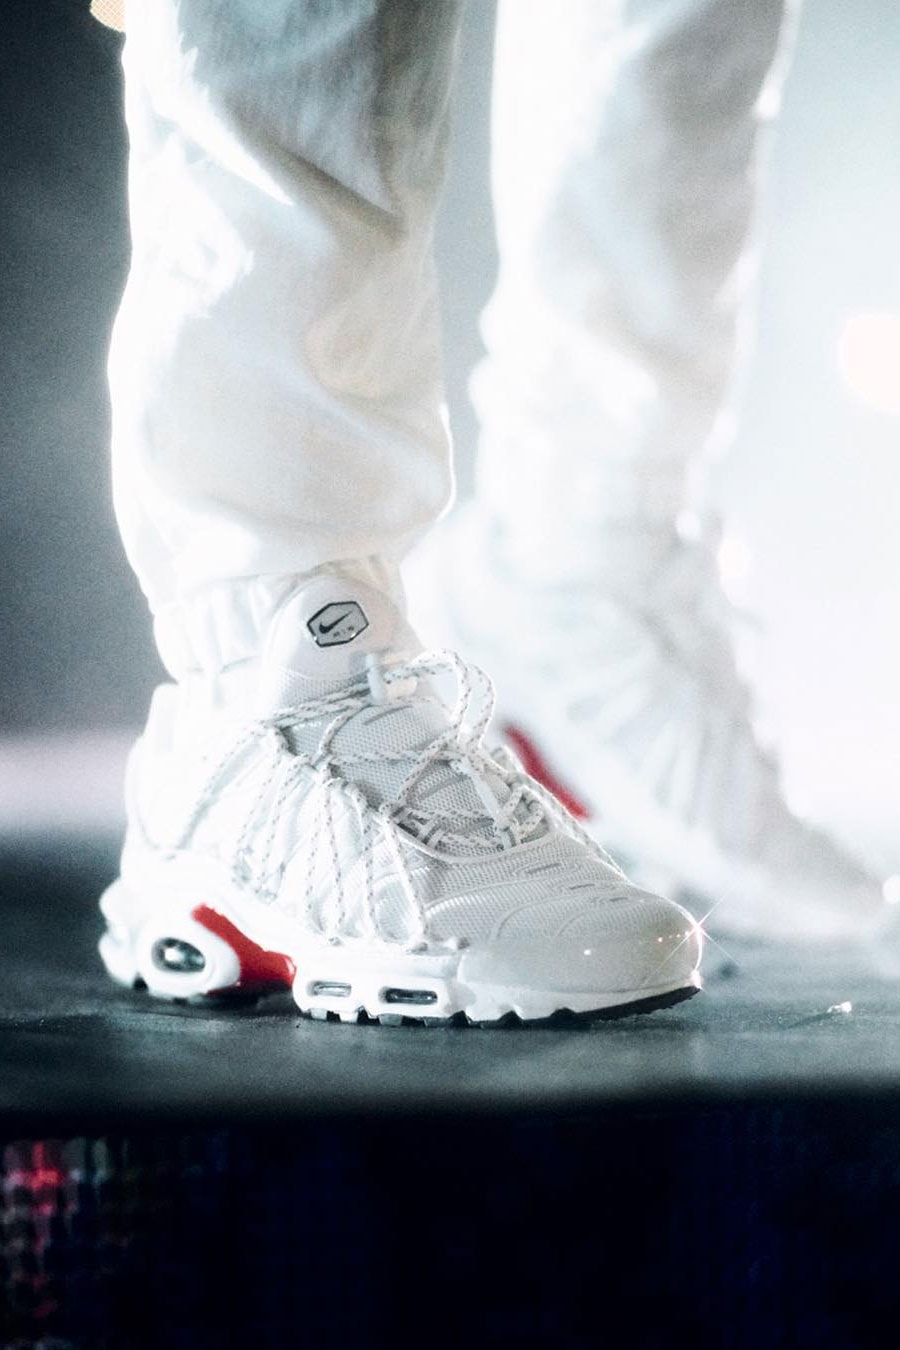 capsule Attendance Cause Drake "Stage Use" Air Max Plus White Colorway | Hypebeast